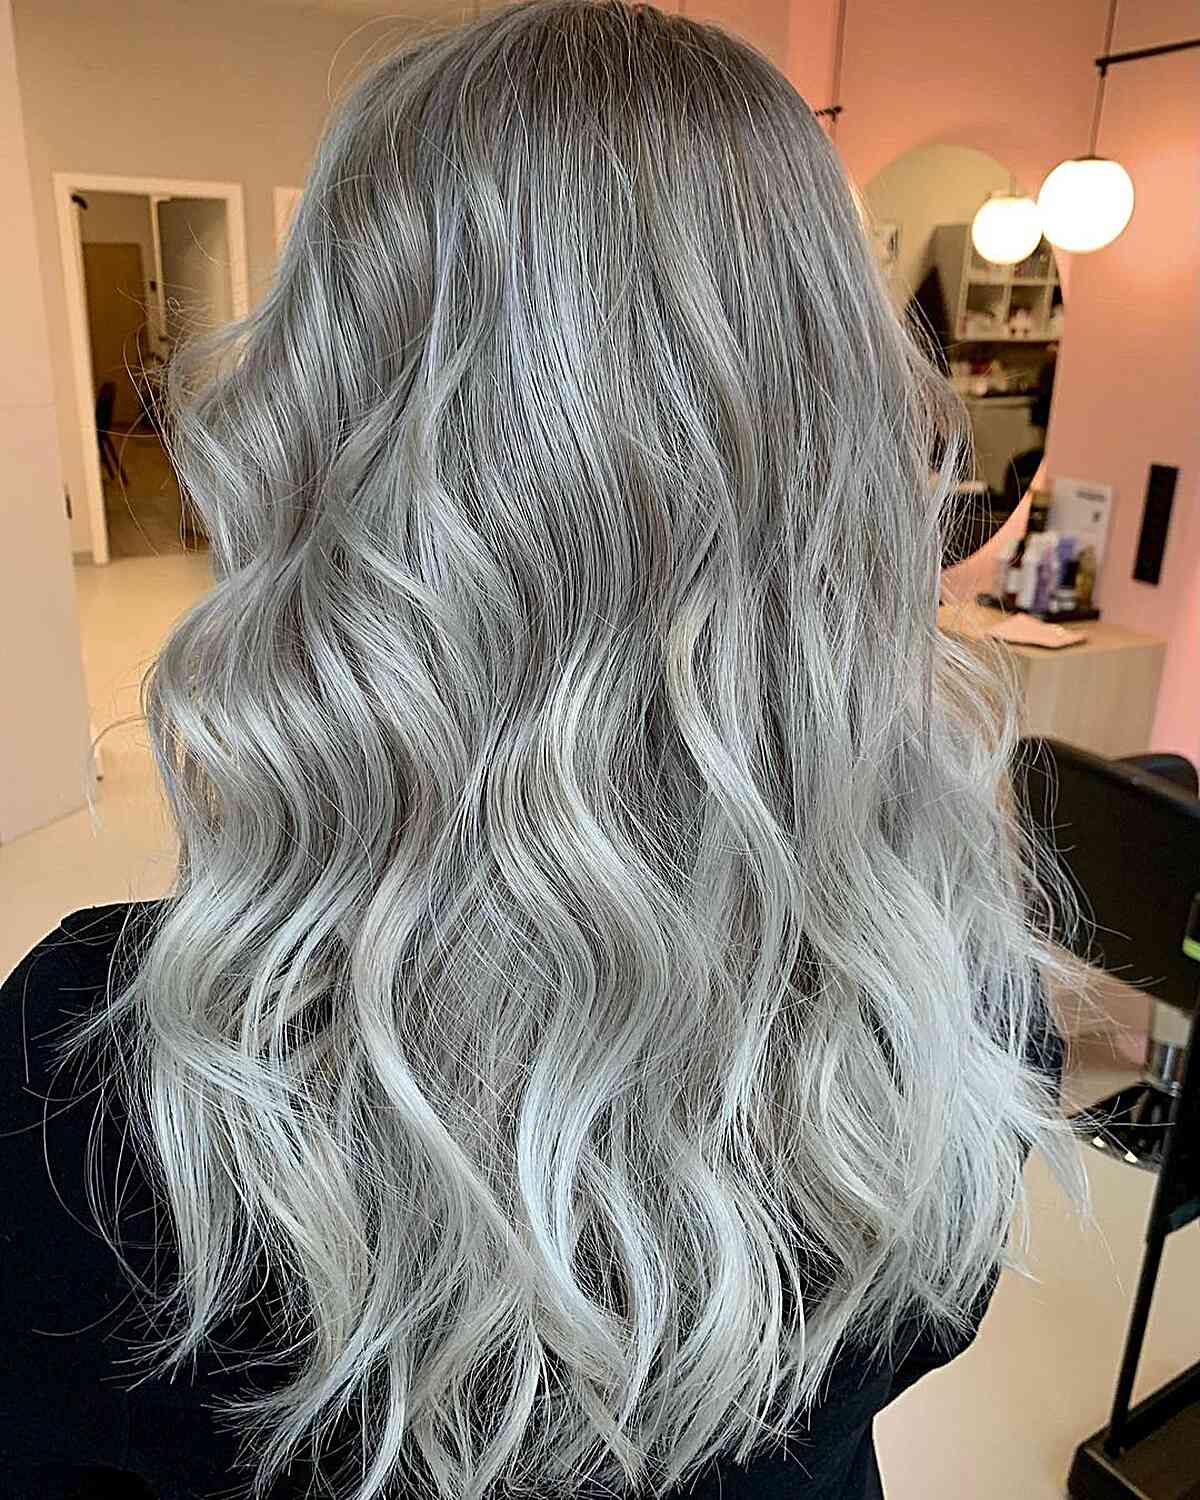 Ice Platinum Blonde Tones on Wavy Light Brown Hair with Airtouch Balayage Technique